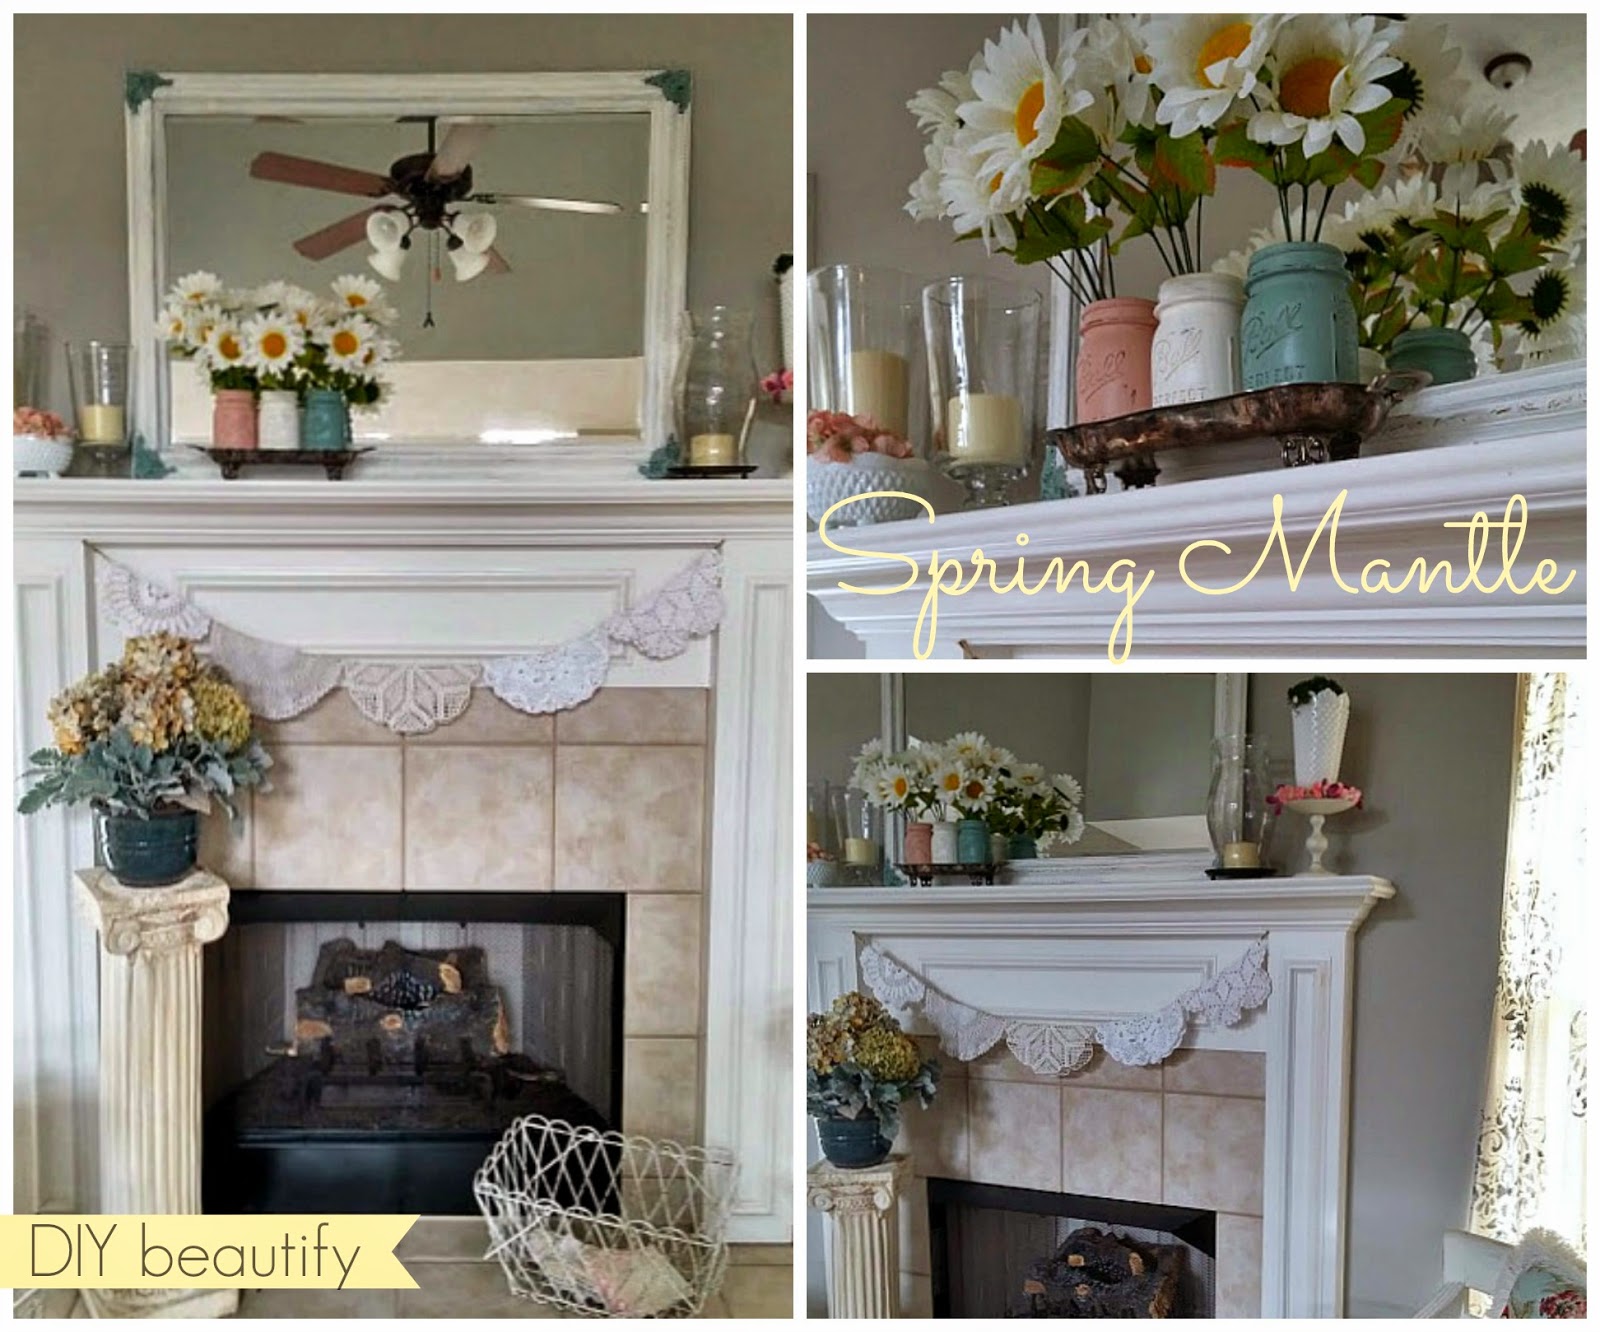 Decorating my Mantle for Spring - DIY Beautify - Creating Beauty at Home